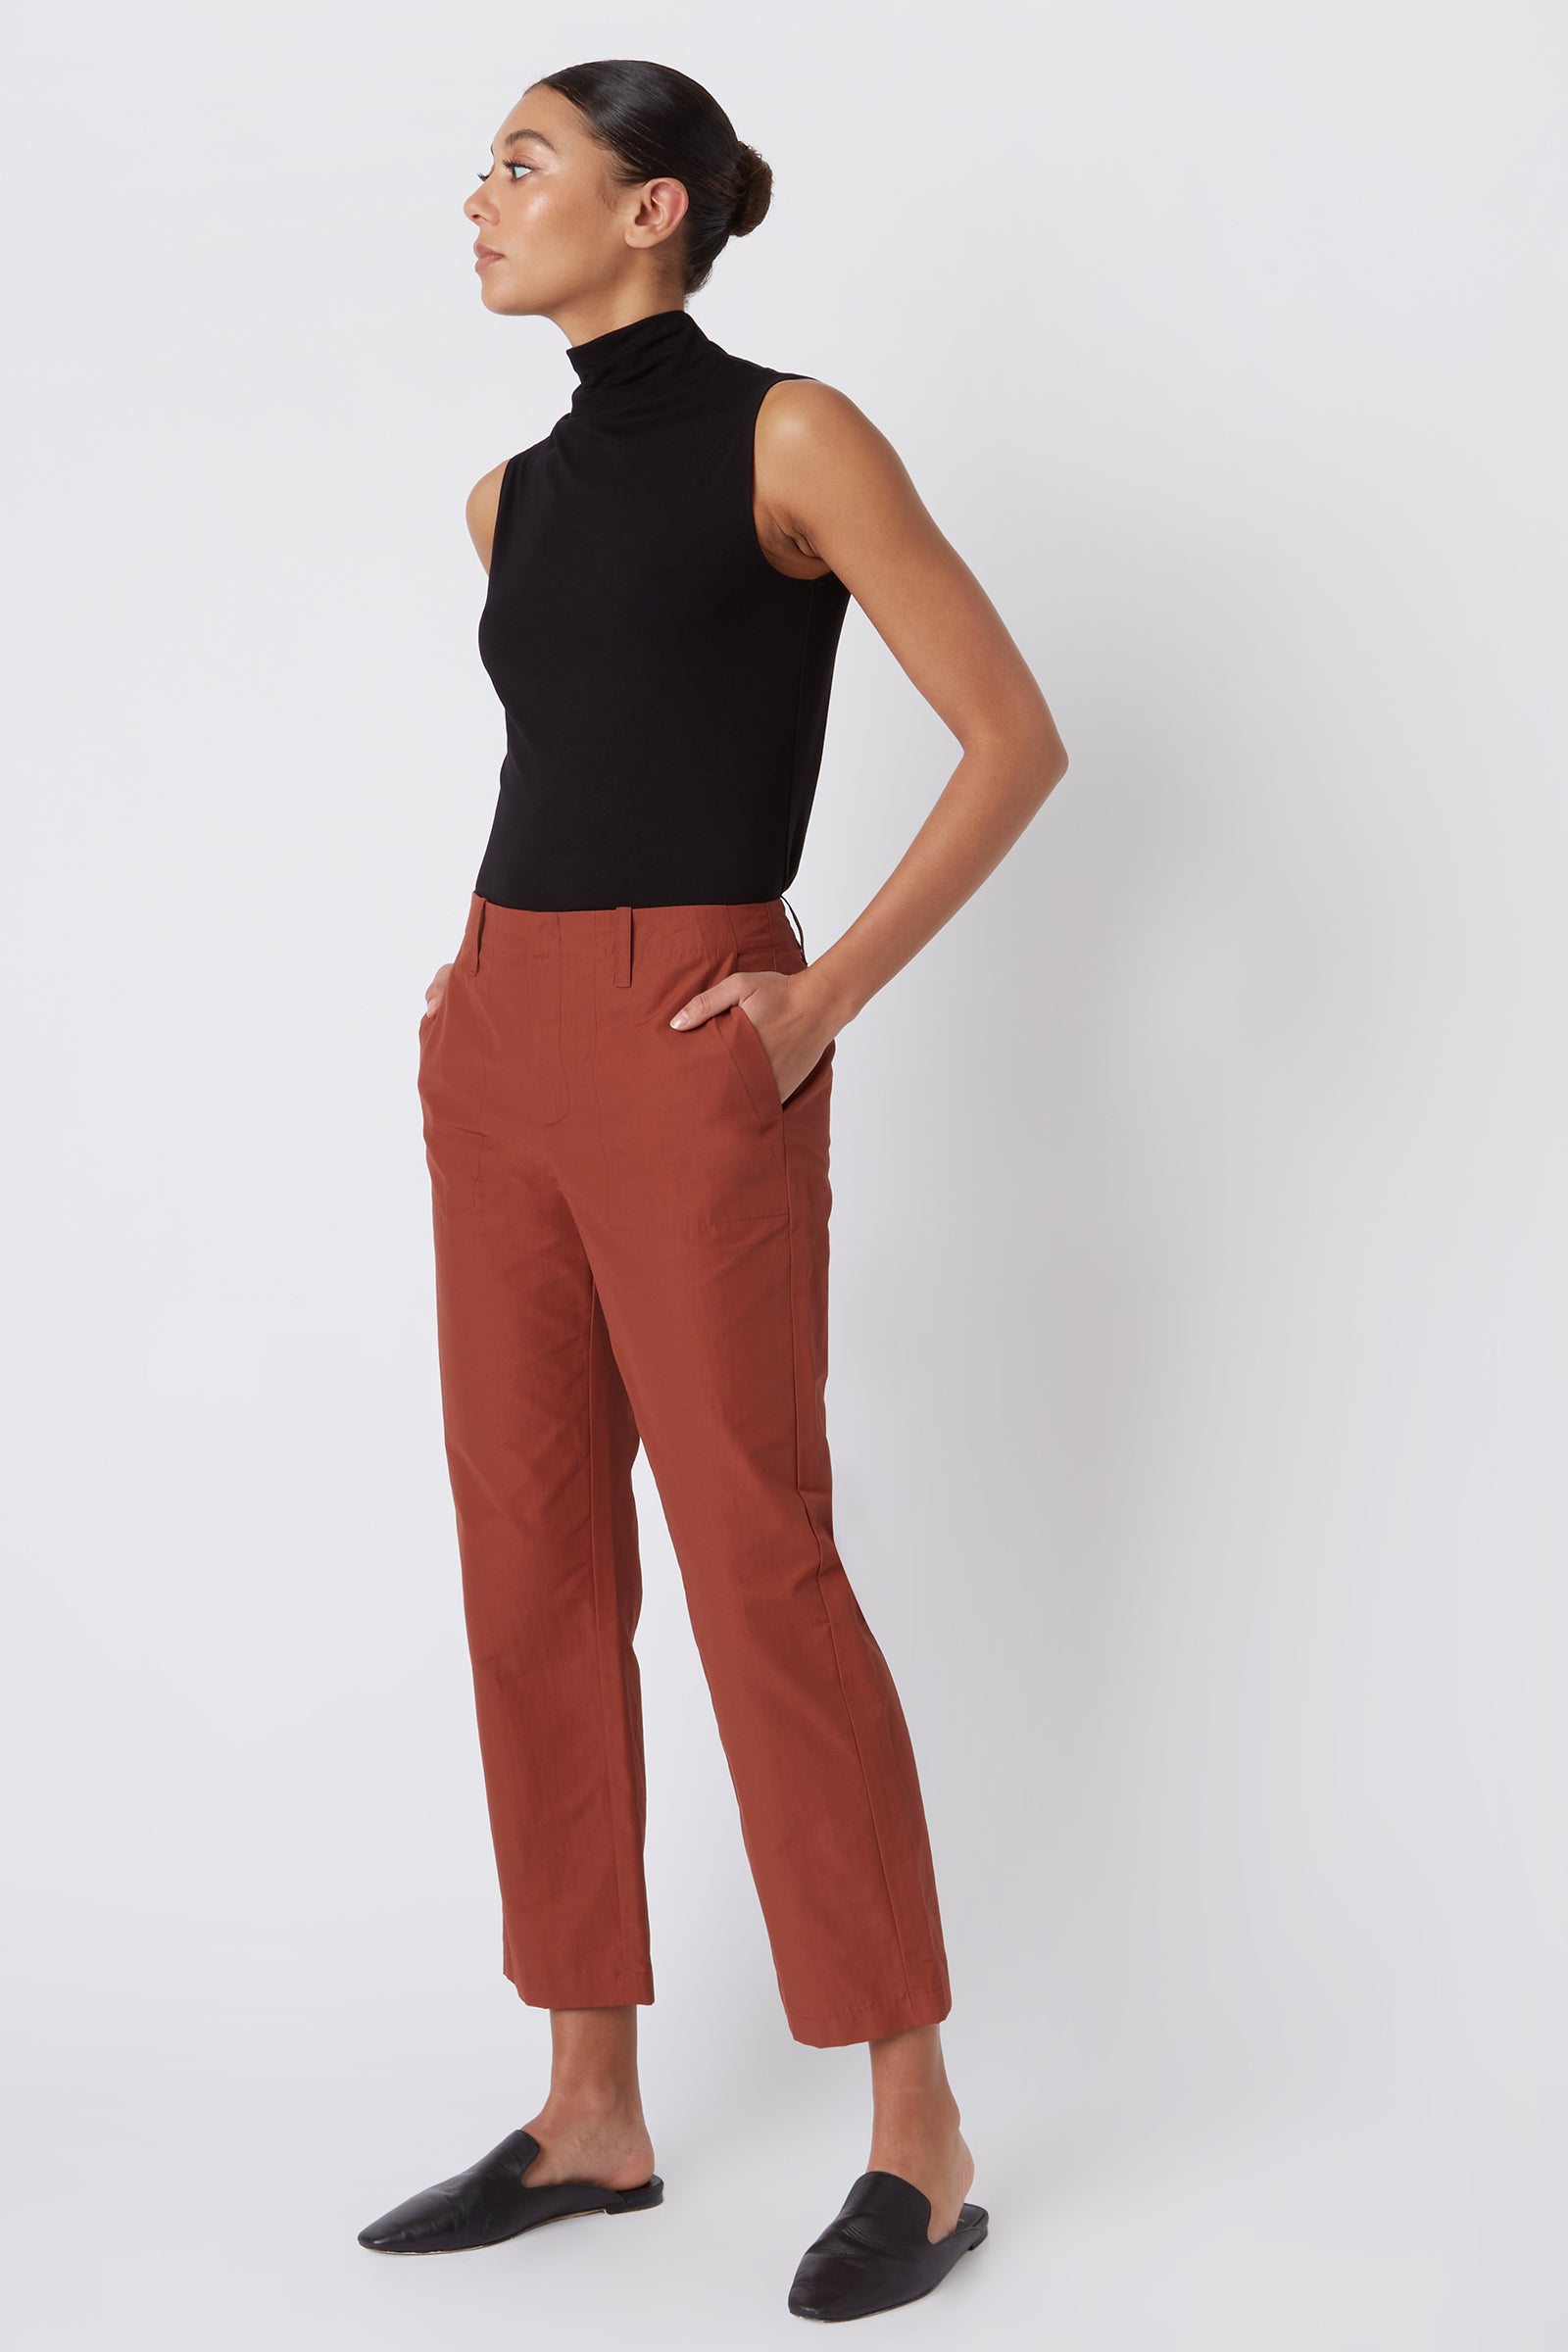 Gray Cigarette pant | Ethnic and Beyond